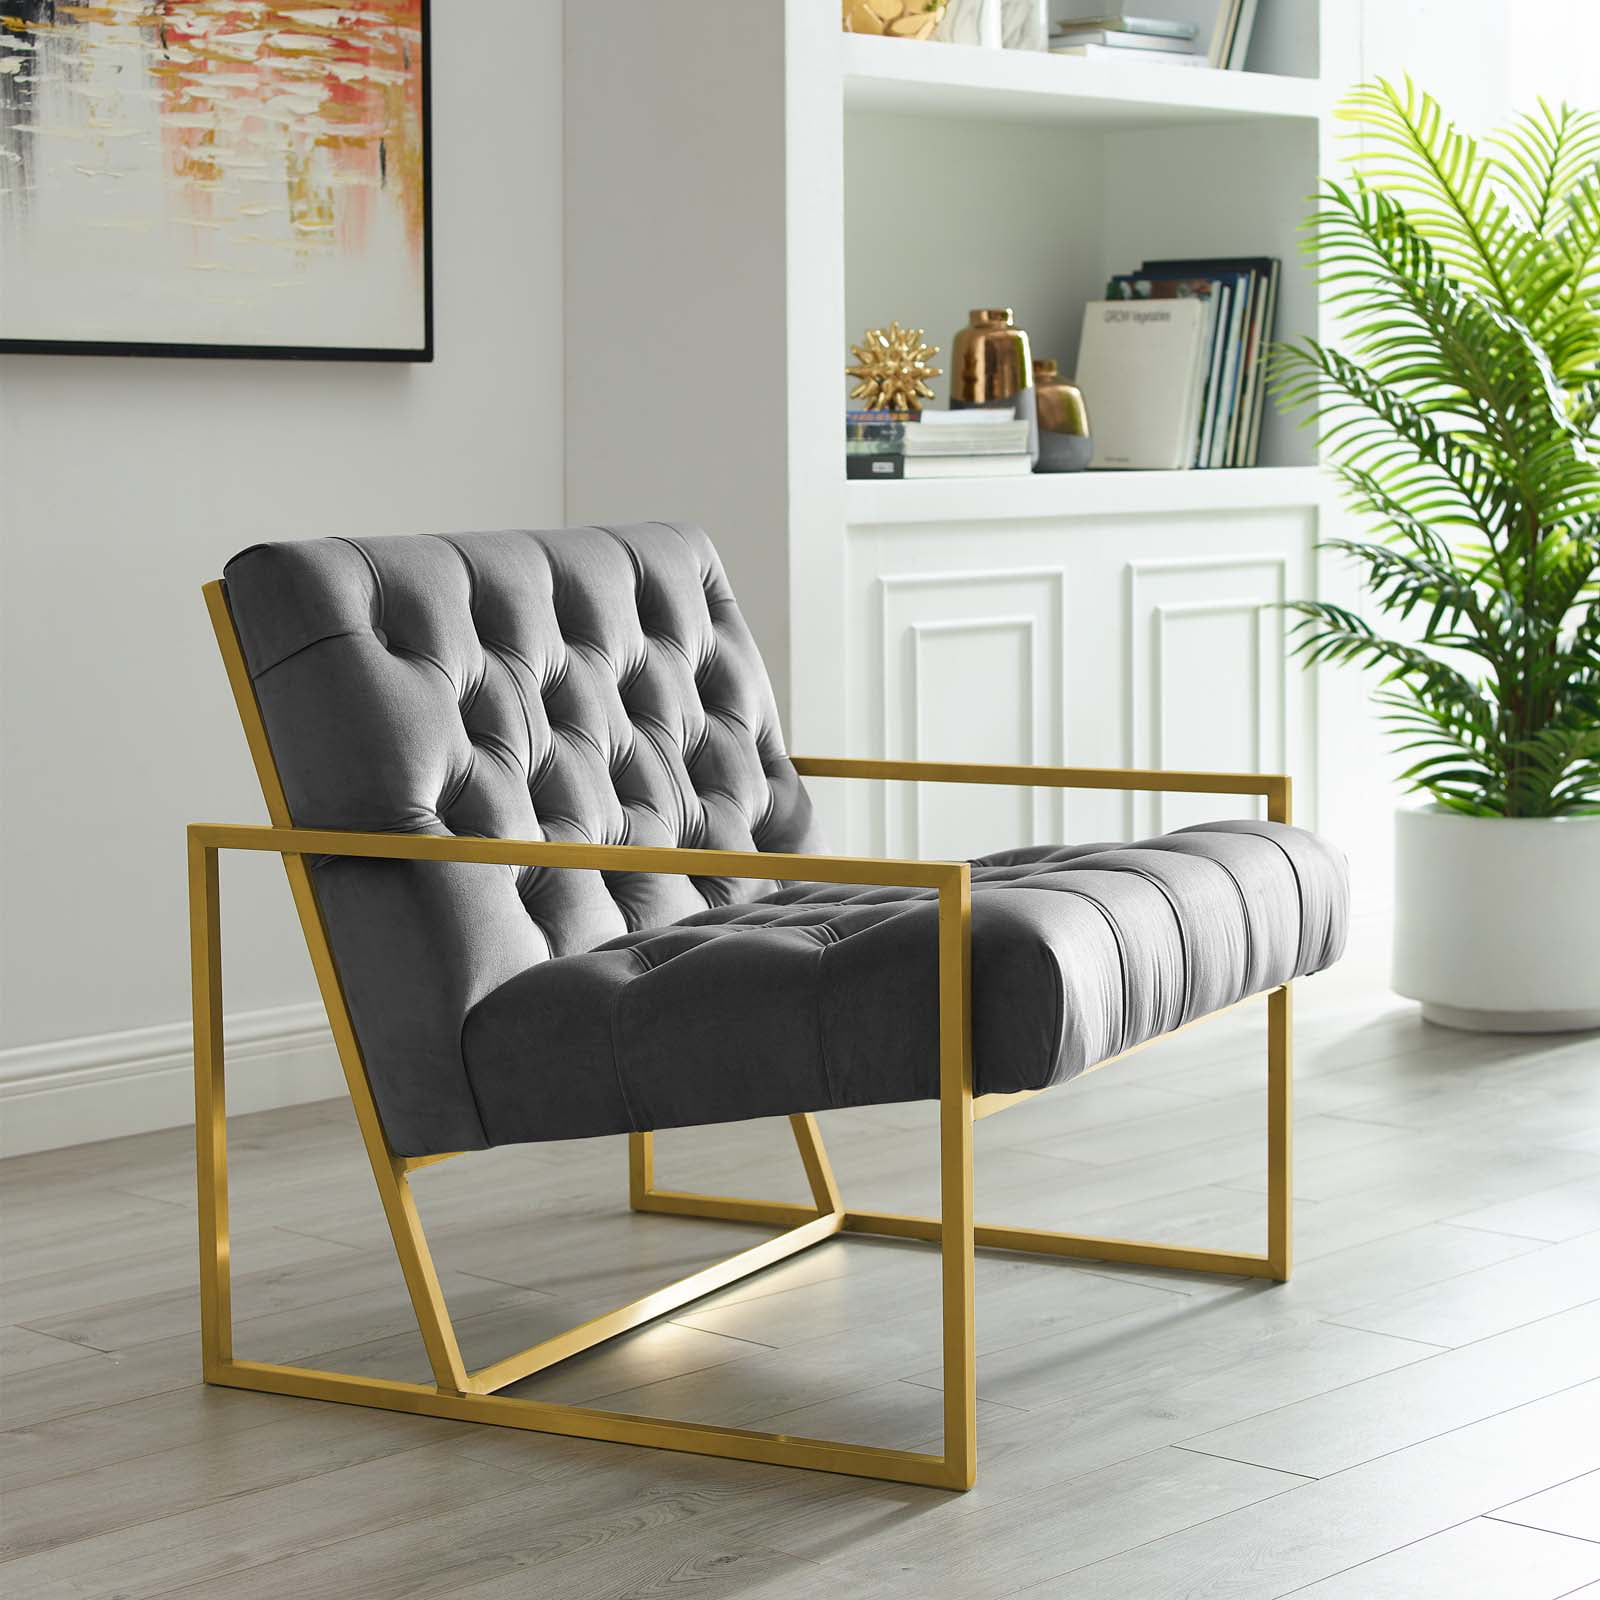 Modway Bequest Velvet Upholstered Gold Stainless Steel Accent Chair